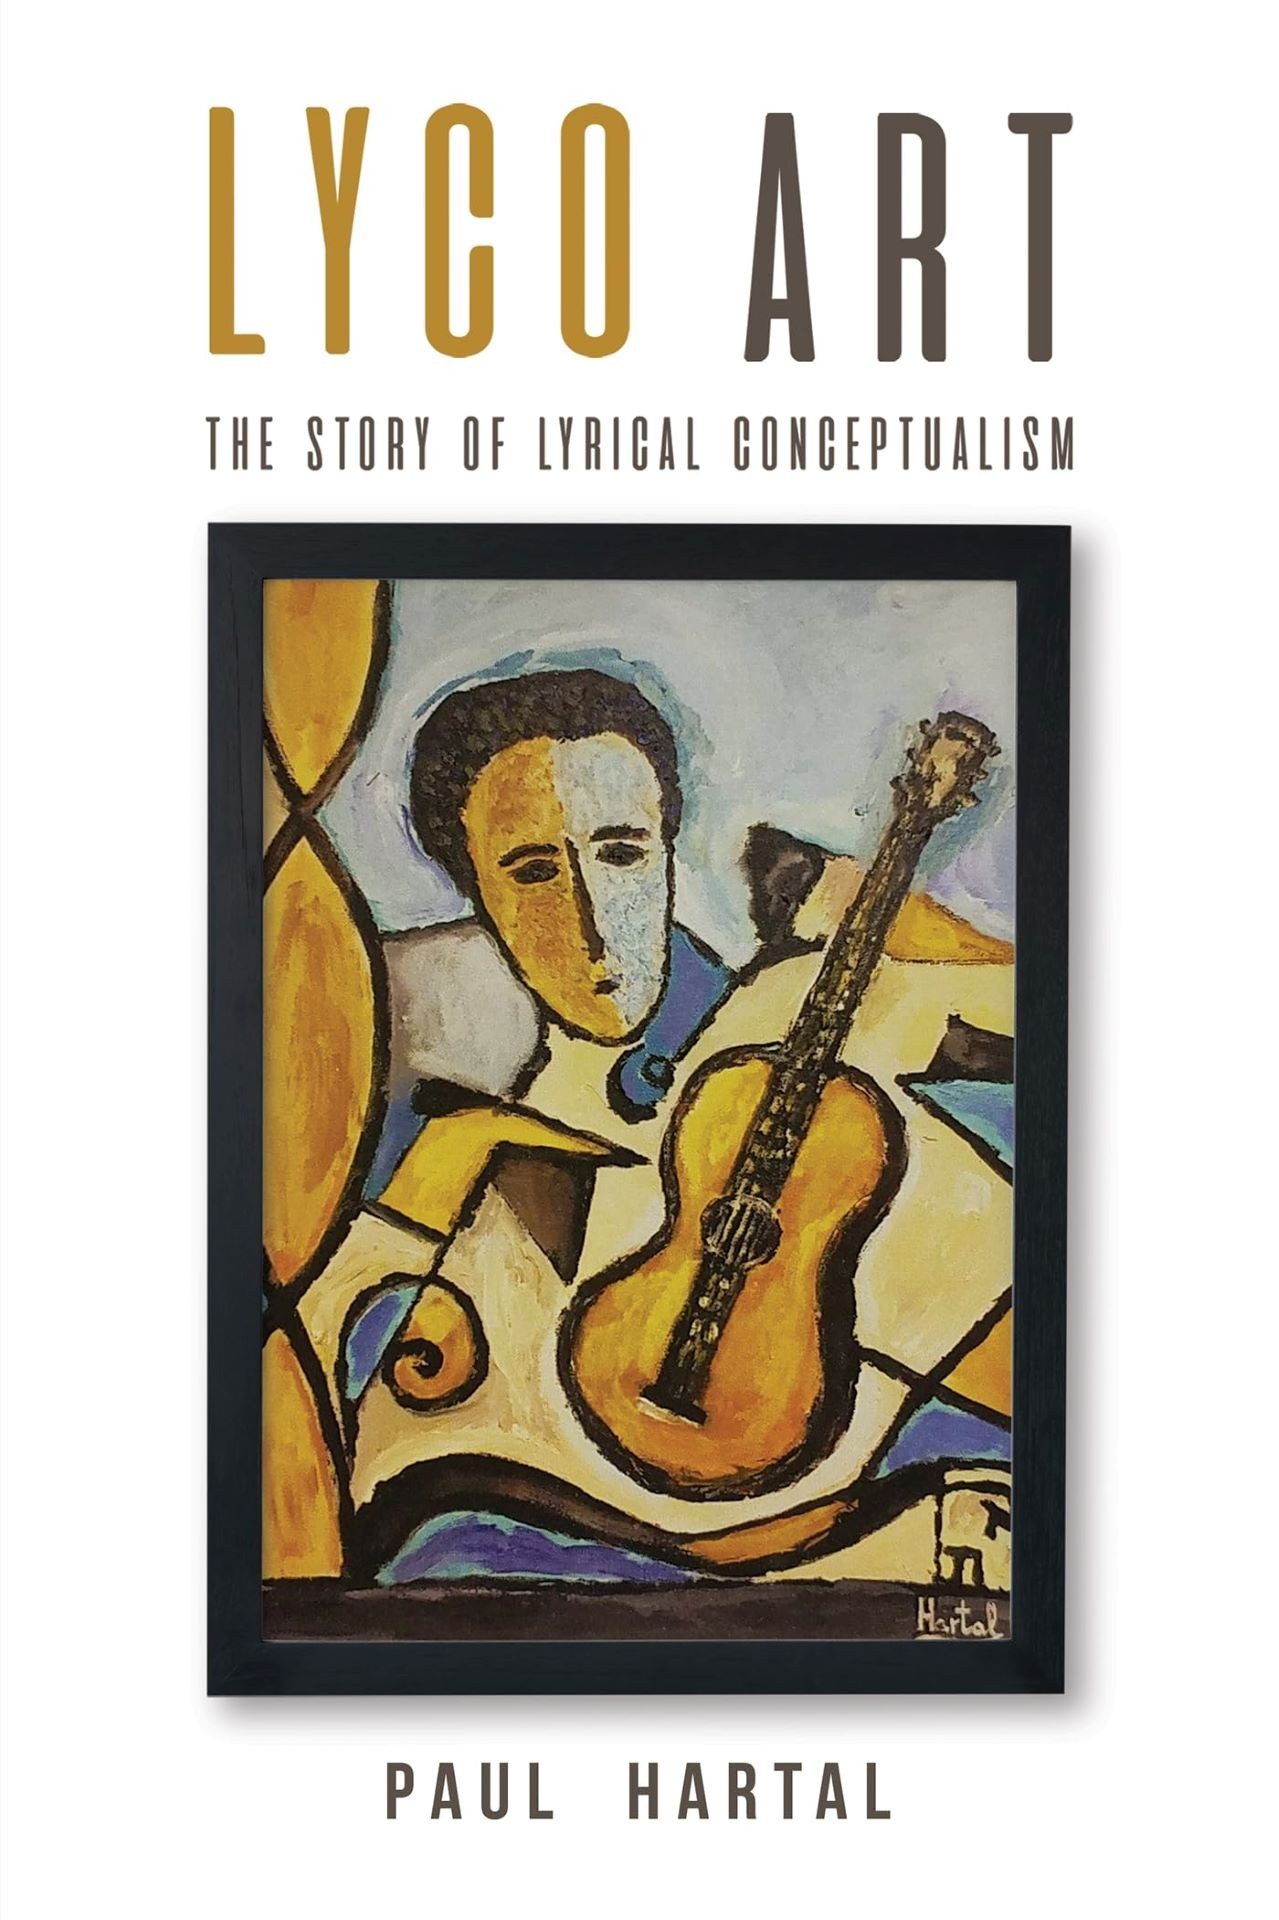 Cover of 'Lyco Art' by Paul Hartal, featuring an abstract painting of a figure with a guitar in a lyrical conceptualism style.